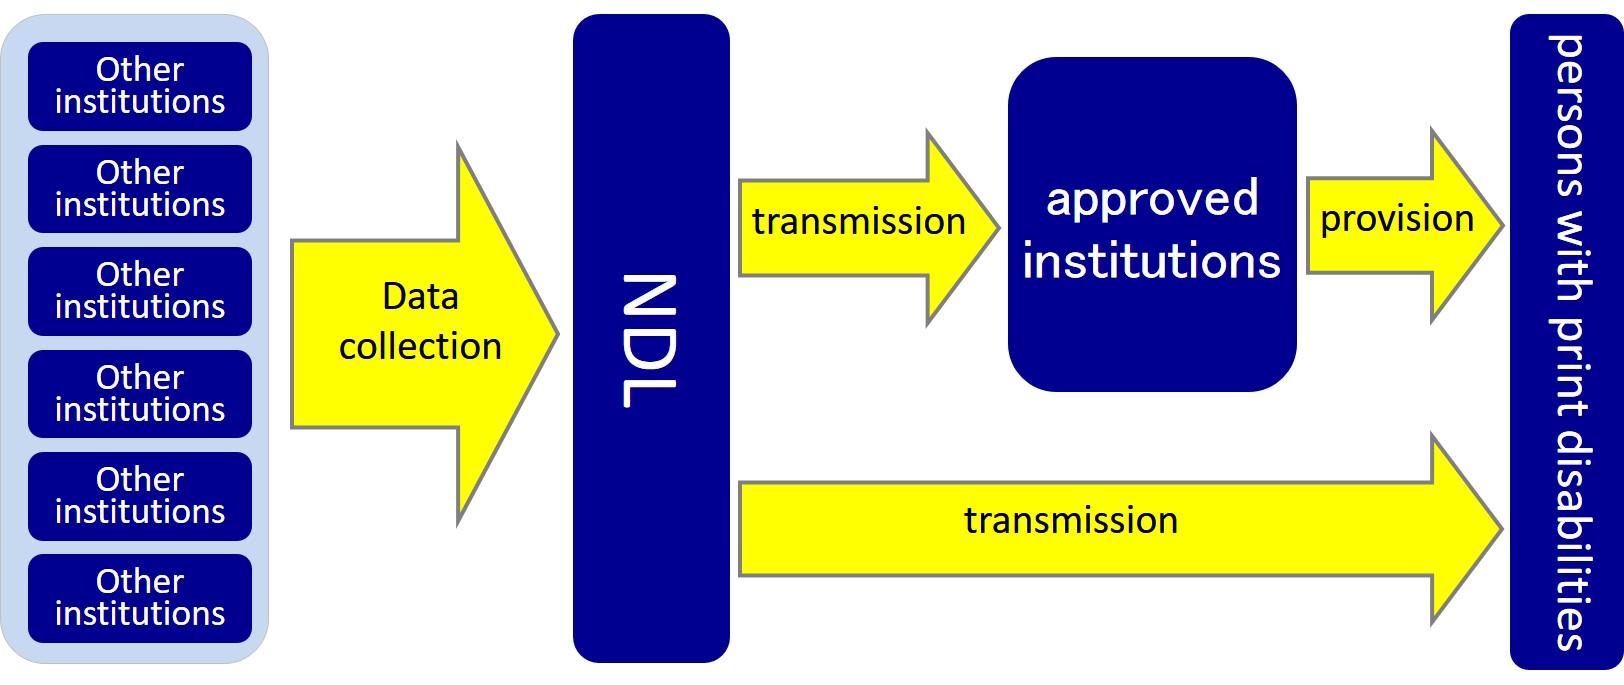 Image of collection and transmission service of data for persons with print disabilities. The image shows how the NDL collects data and transmits them to individual users such as persons with print disabilities directly or provides them via approved institutions for transmission.